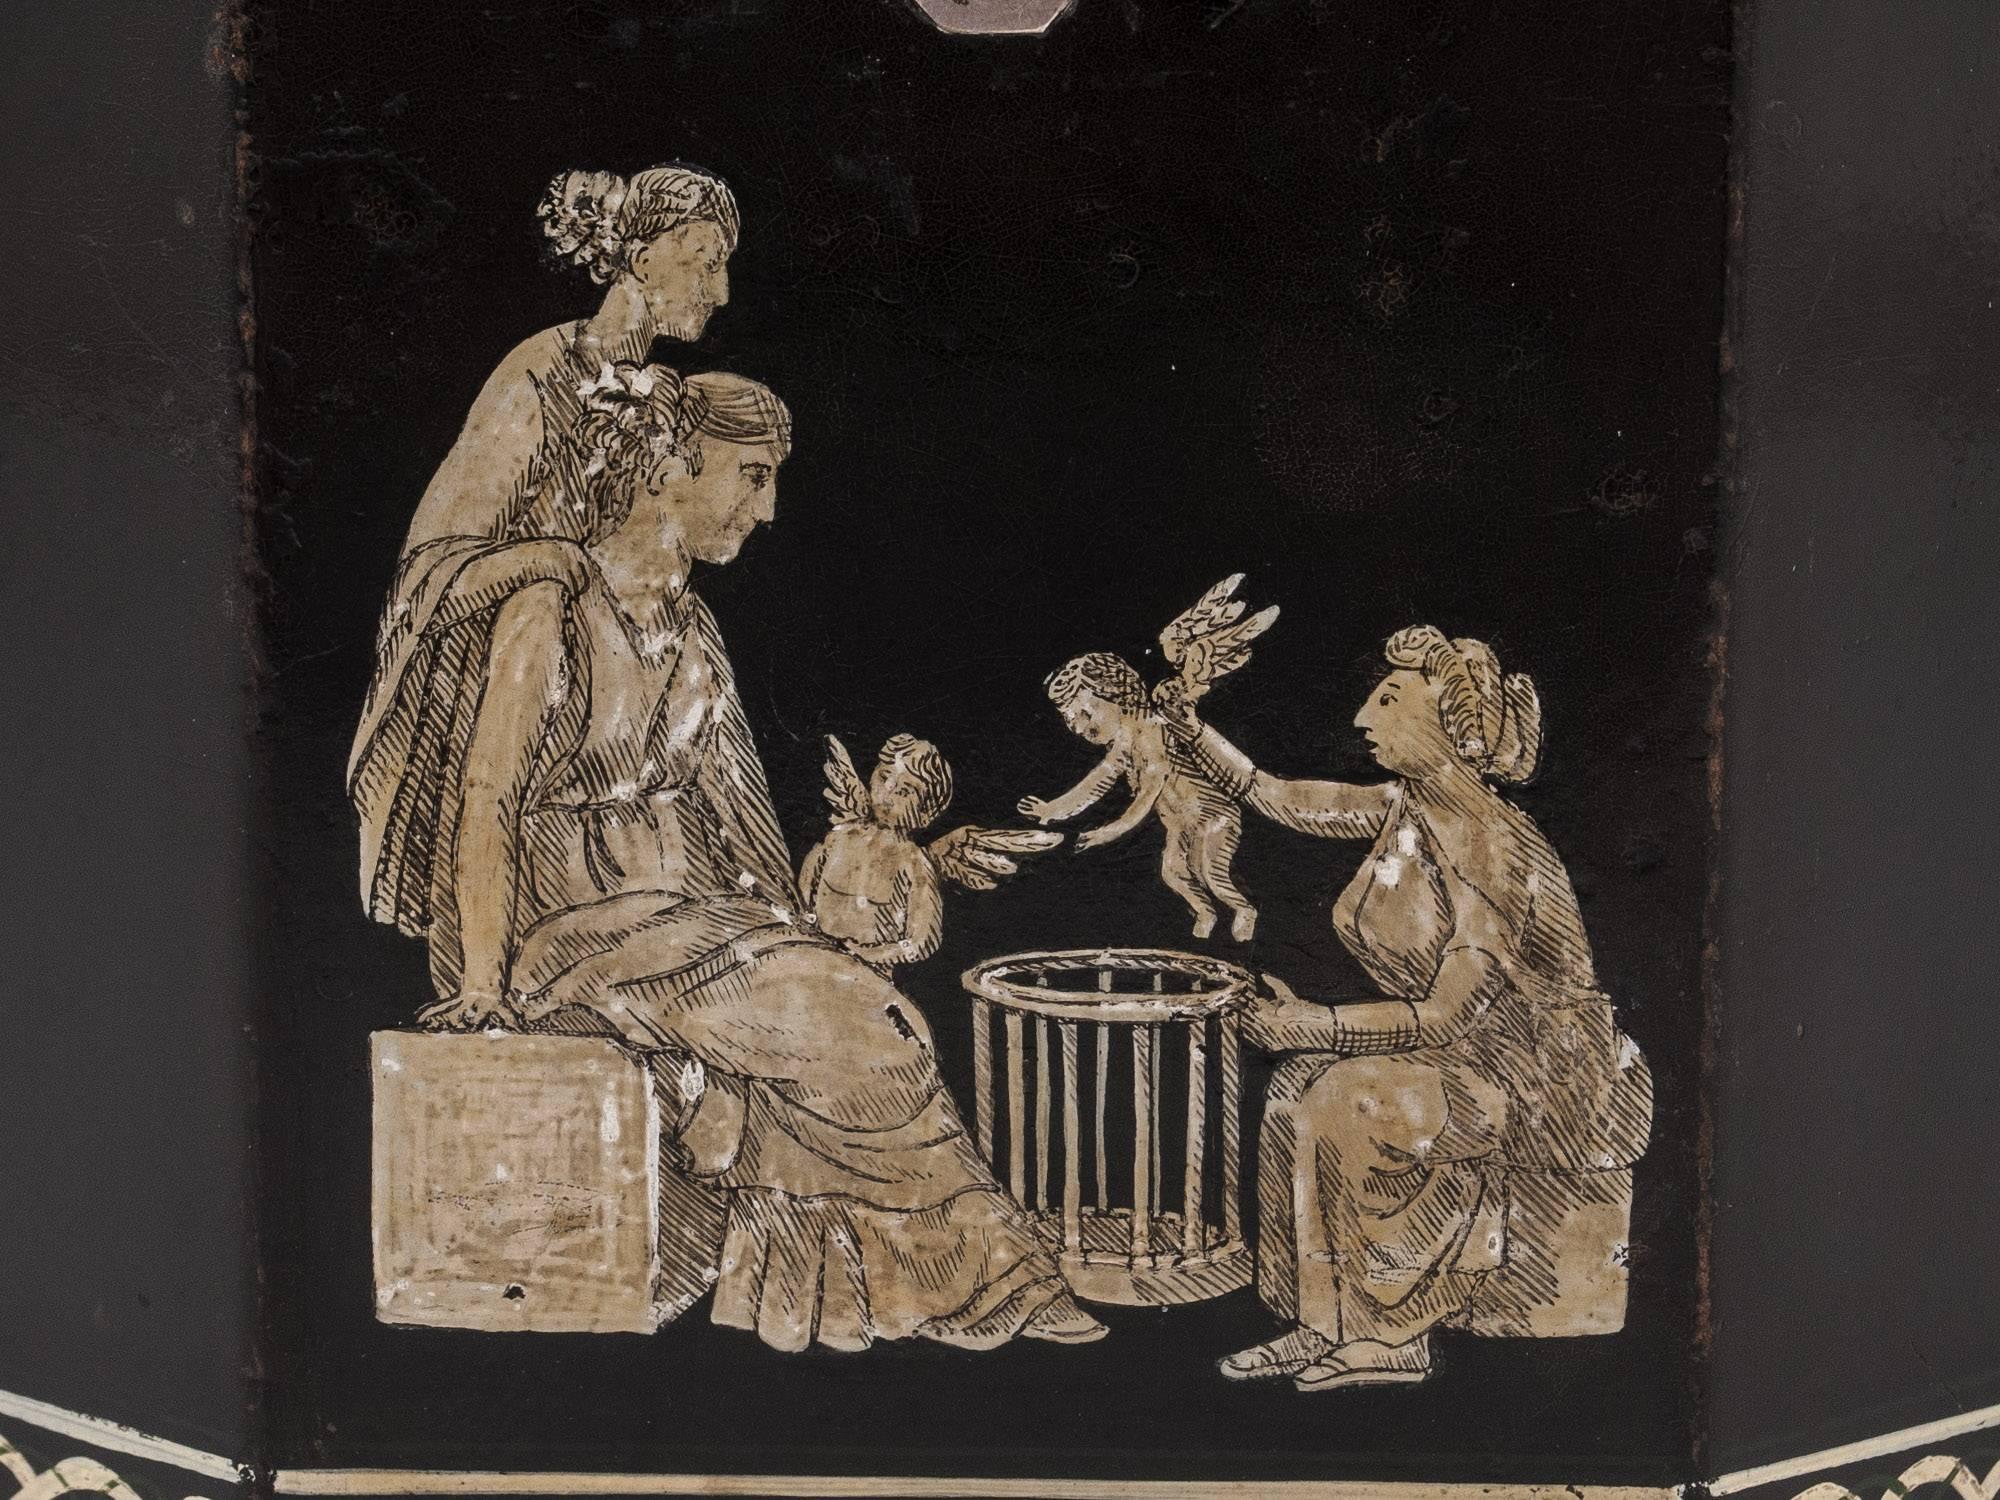 (This tea caddy is currently on display at  “A Tea Journey: from Mountain to the Table” at Compton Verney until the 22nd september.)
Octagonal papier mâché tea caddy, decorated with classical figures and cherubs. Entwined diaper borders which are